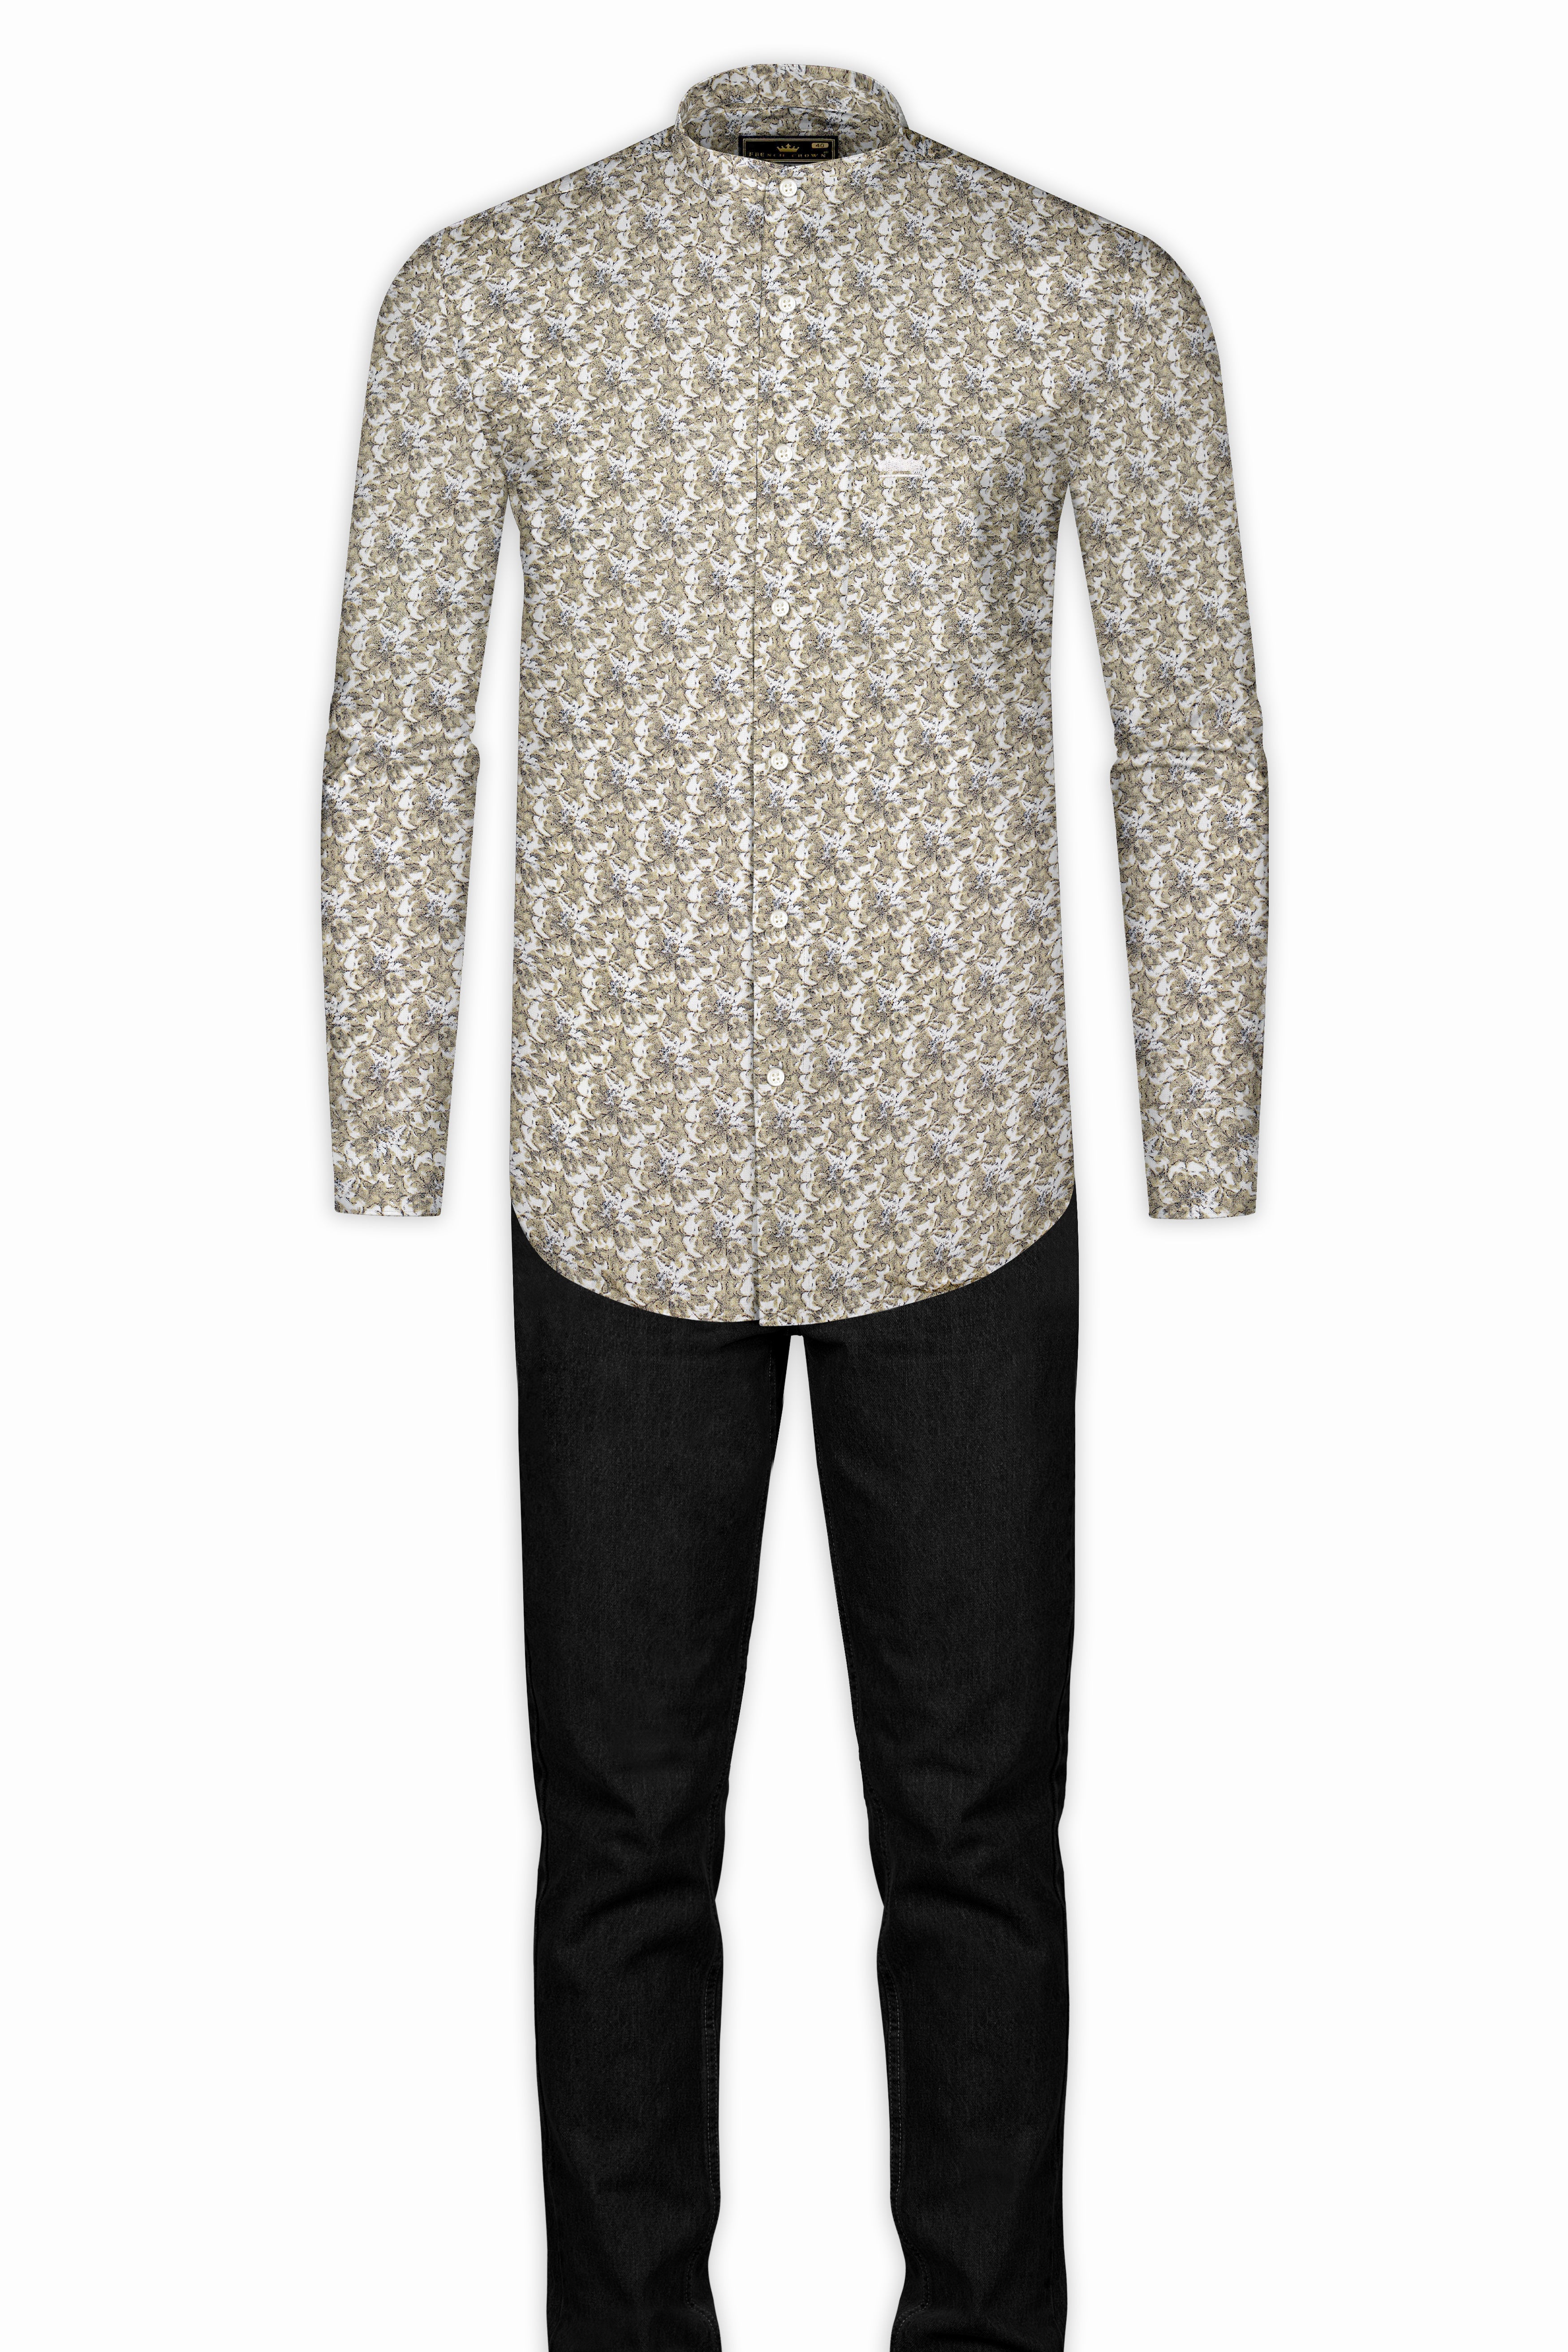 White with Tana Brown Floral print Luxurious Linen Shirt